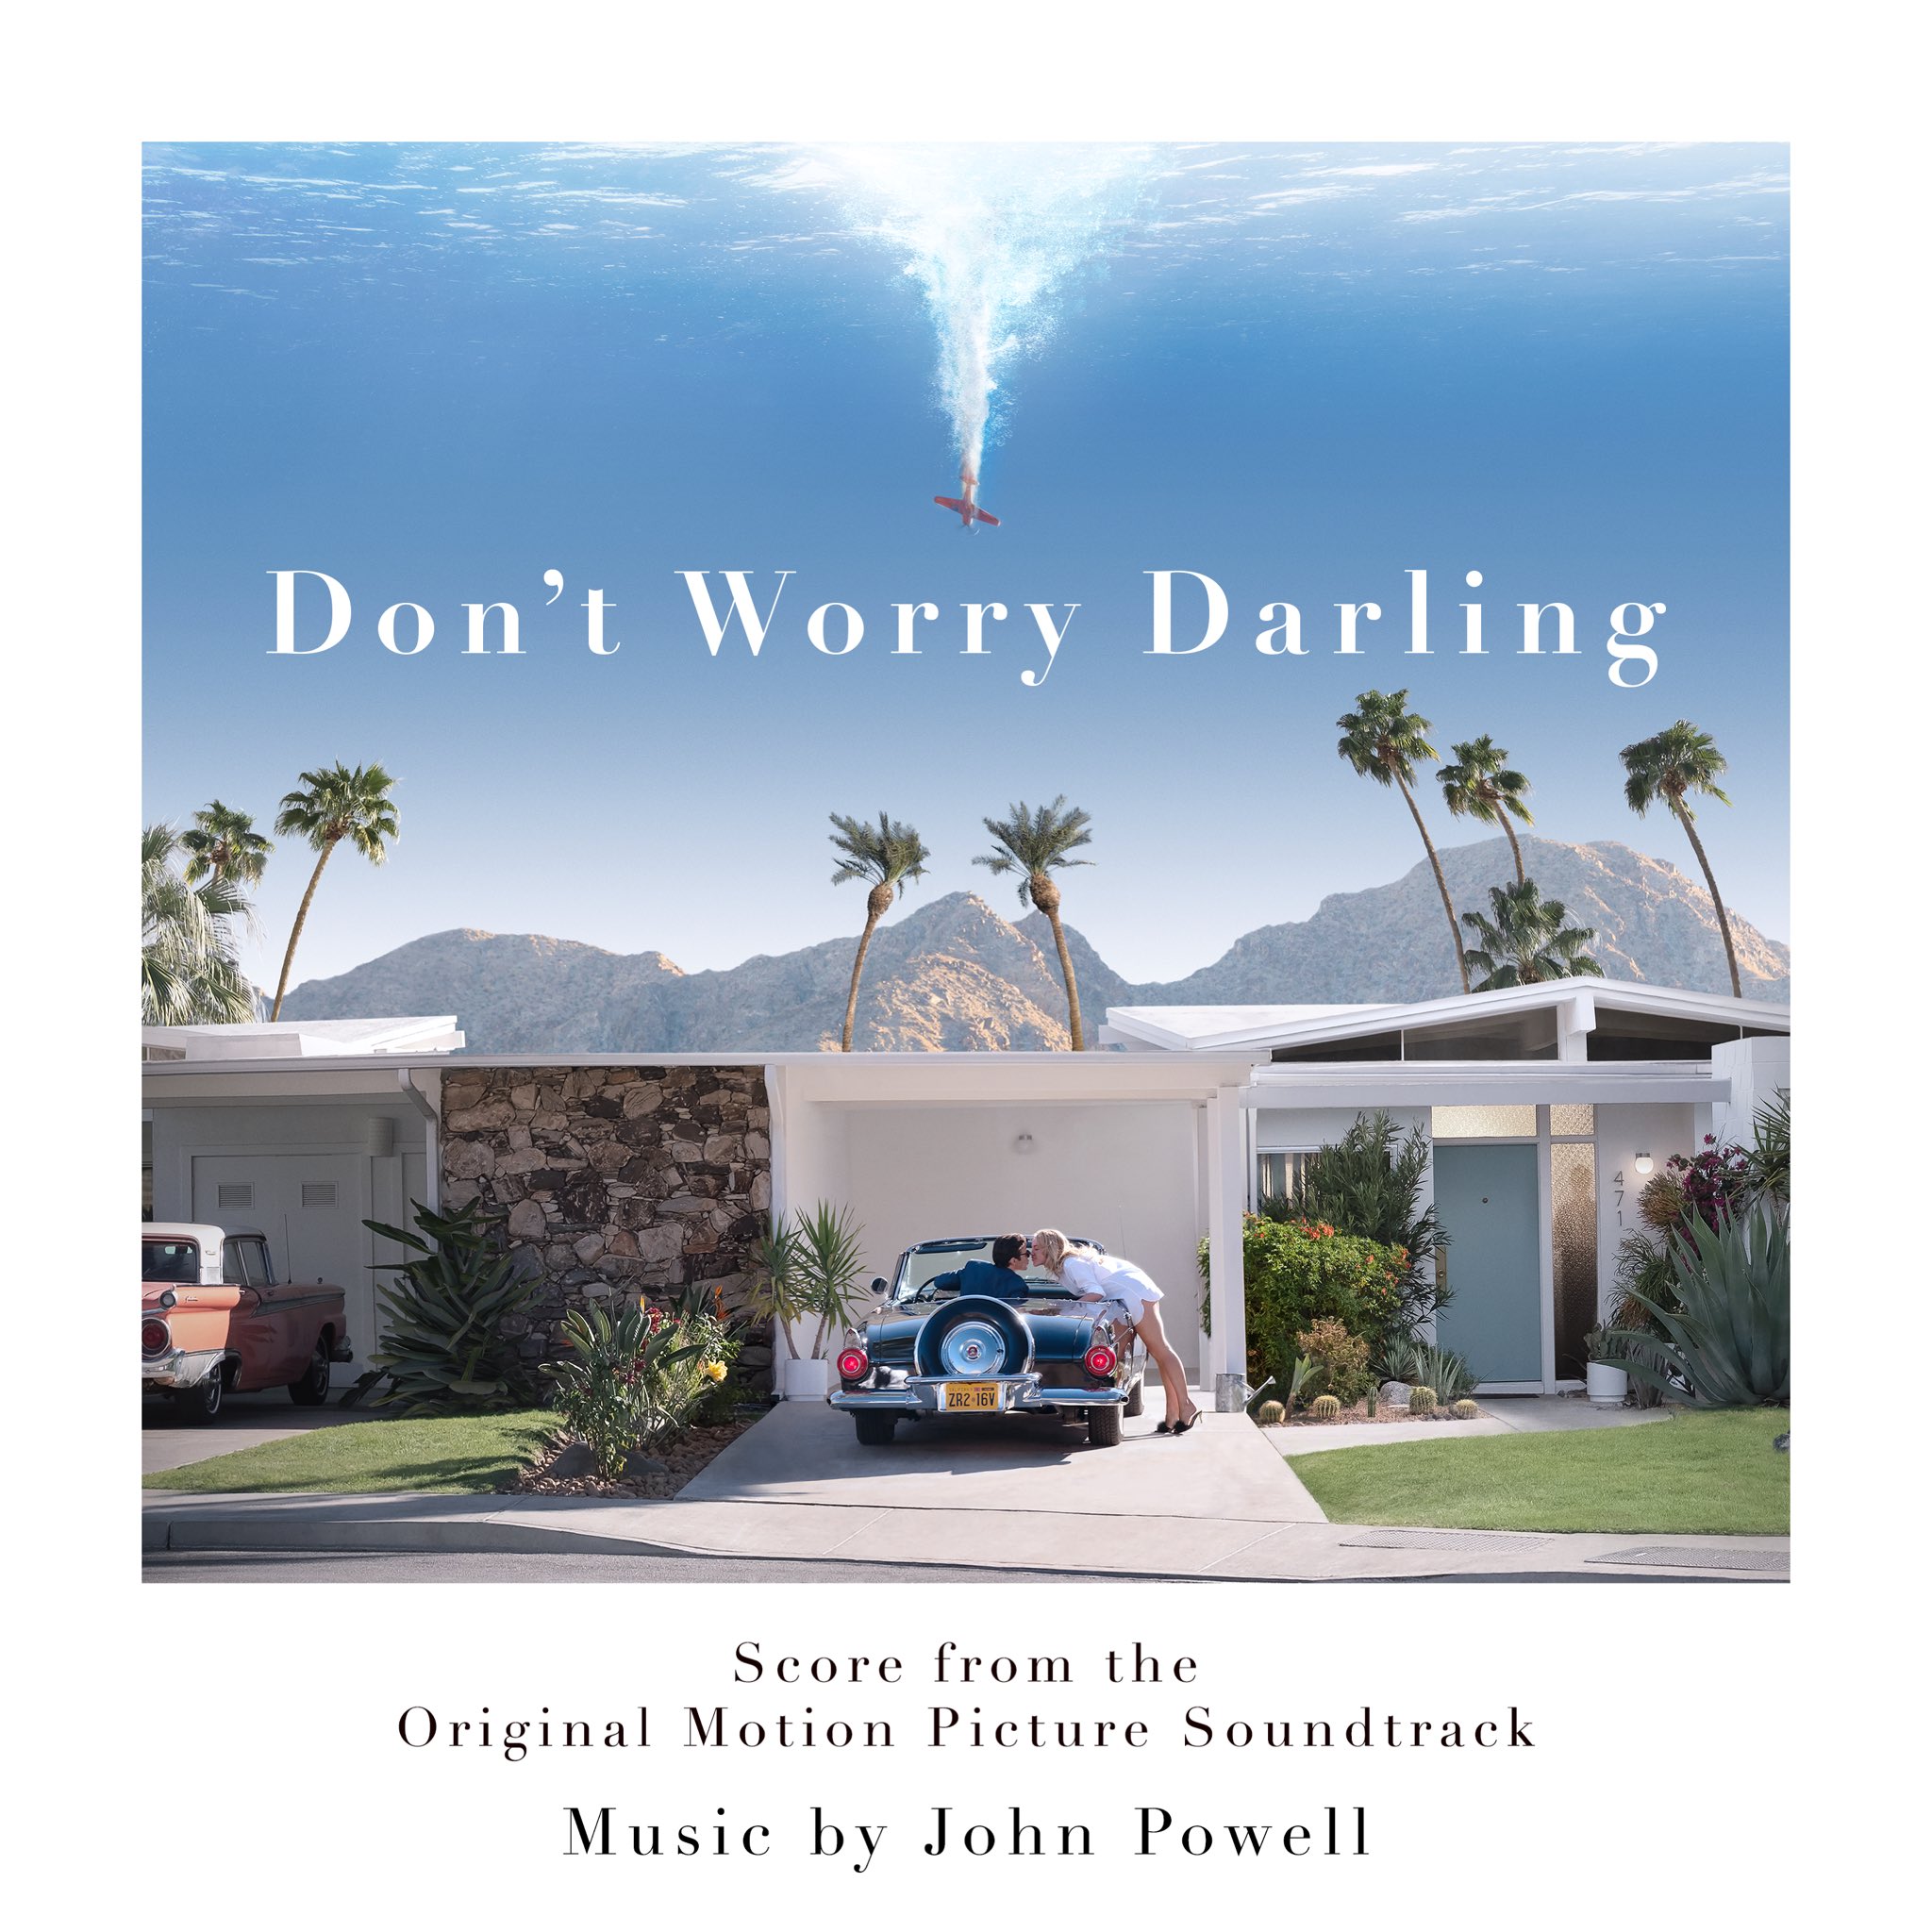 Don’t Worry Darling: Release date, cast, plot, trailer